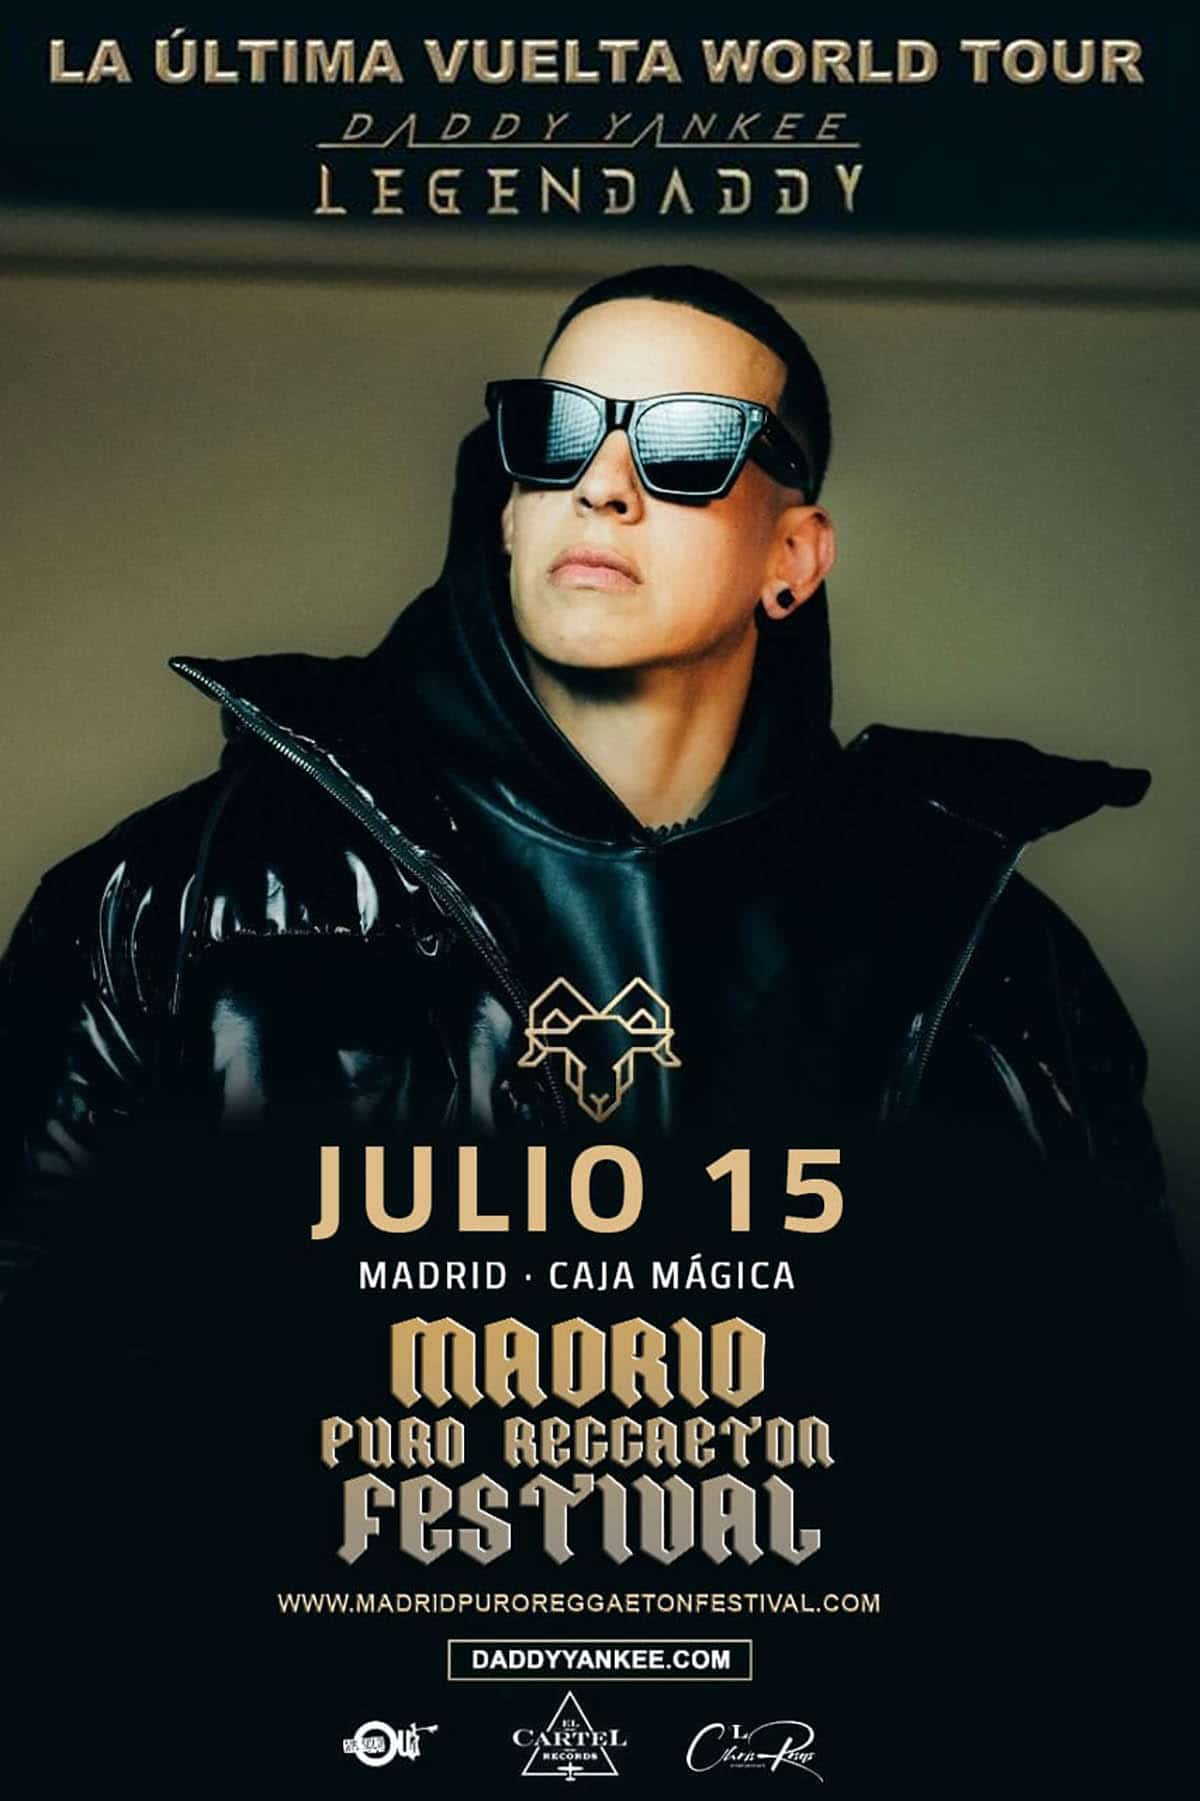 Say goodbye to Daddy Yankee at his last concert in Madrid - HIGHXTAR.